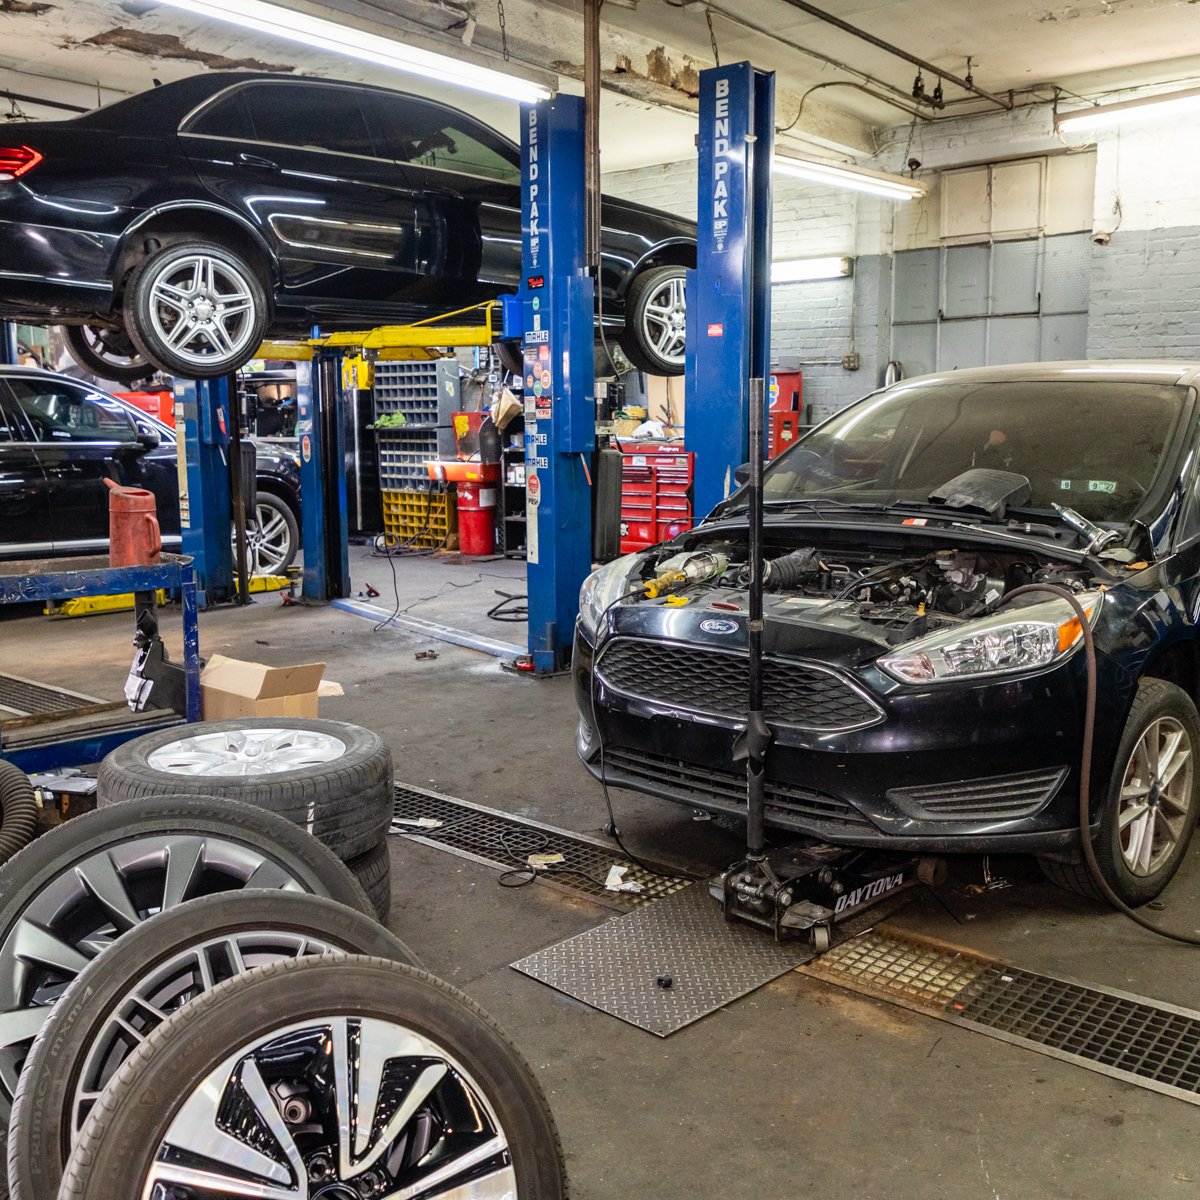 Show your car some love by stopping in today for complete auto repair! #RepairsOnWheels #BrooklynWheelRepair #24HourService #AroundTheClockMaintenance #EngineRepair #WheelRepair #CompleteAutoRepair #QuickService #HonestAutoService